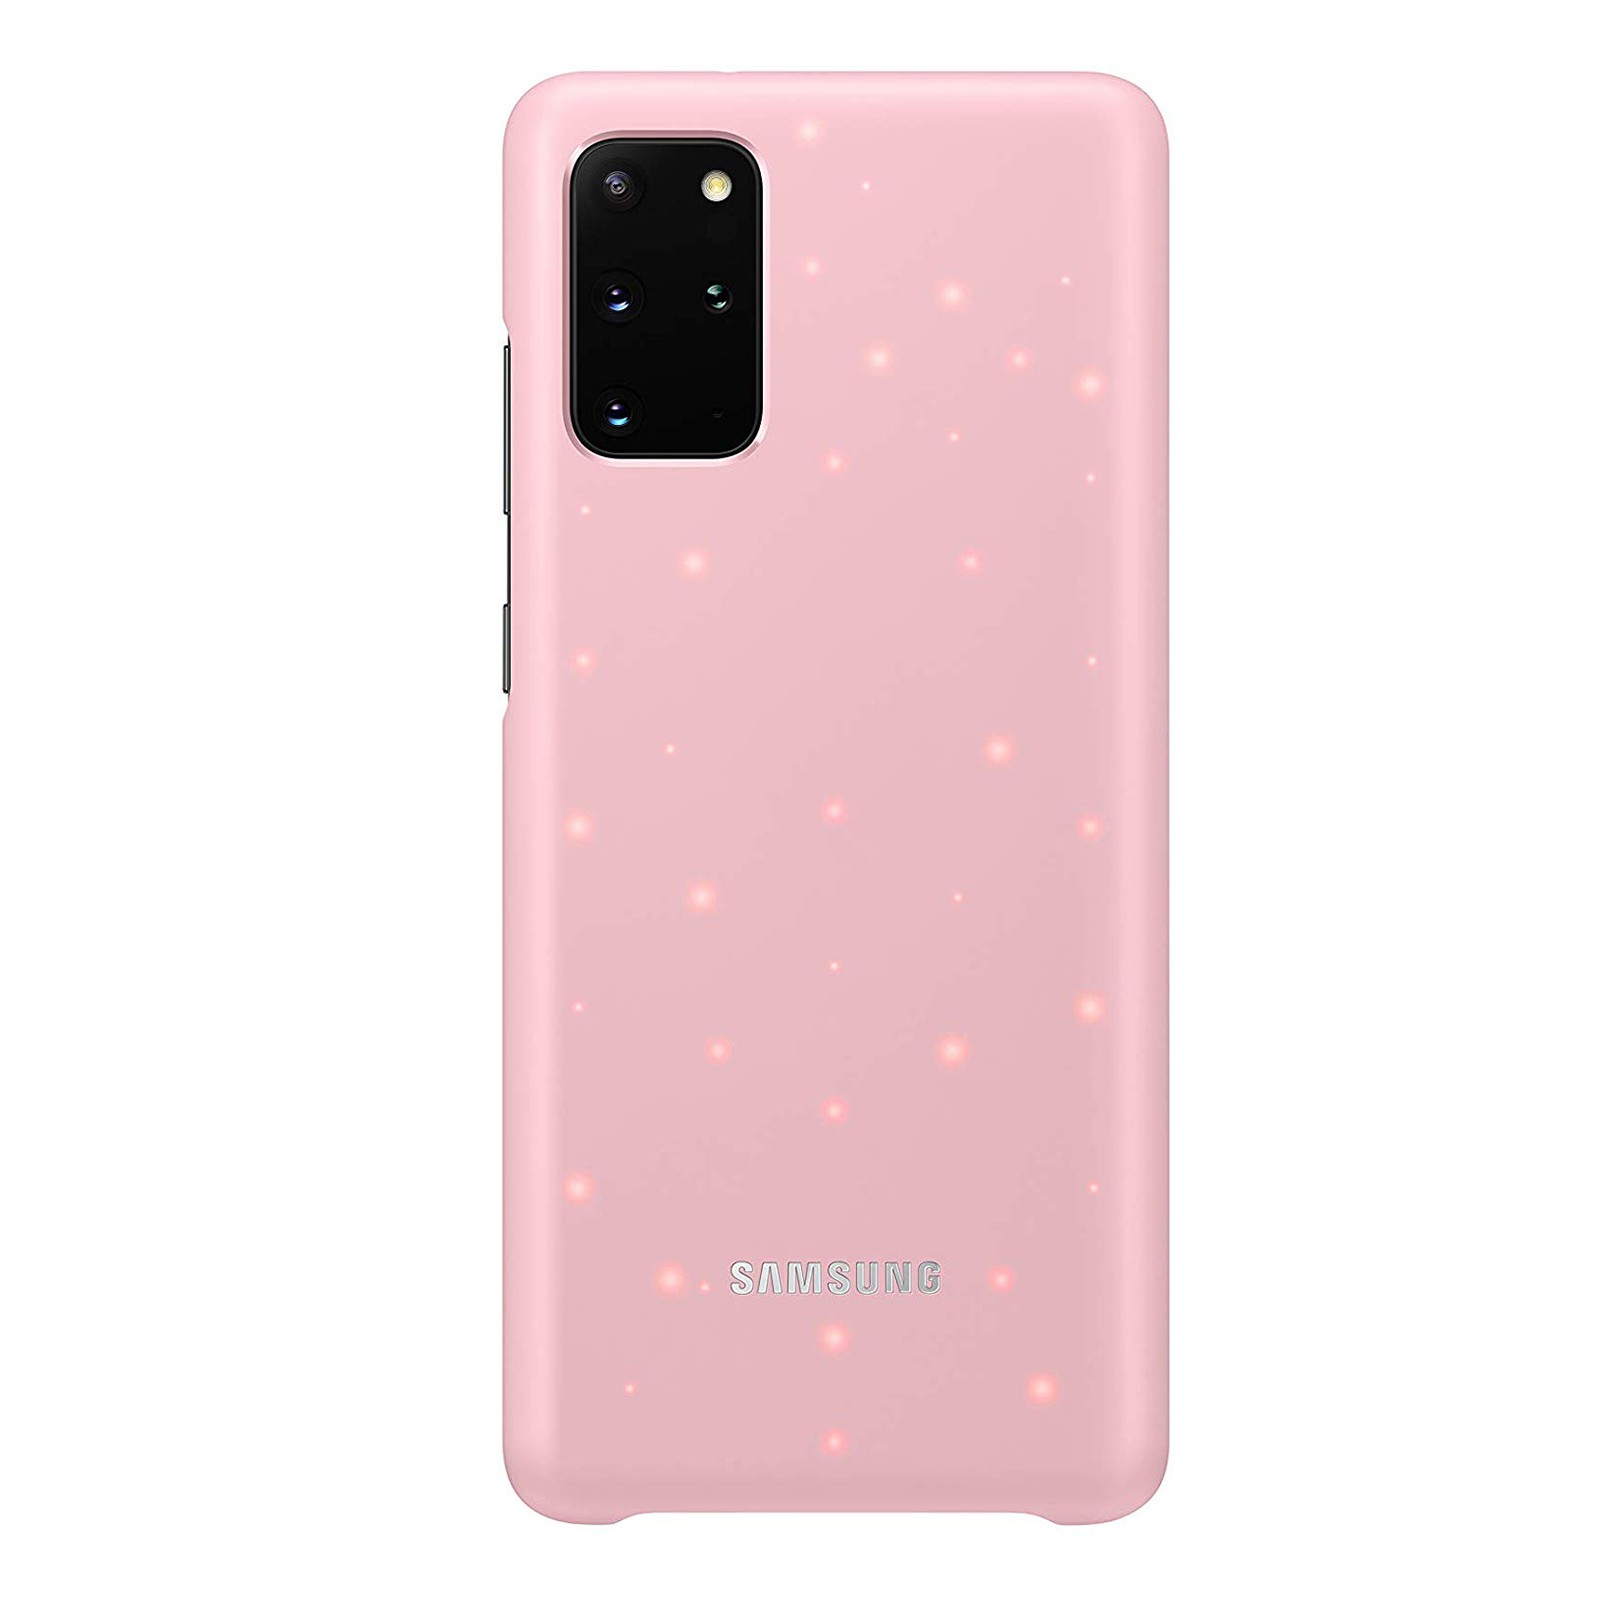 SAMSUNG EF-KG985 LED COVER GALAXY S20+ Backcover, Pink Galaxy PINK, S20+, Samsung